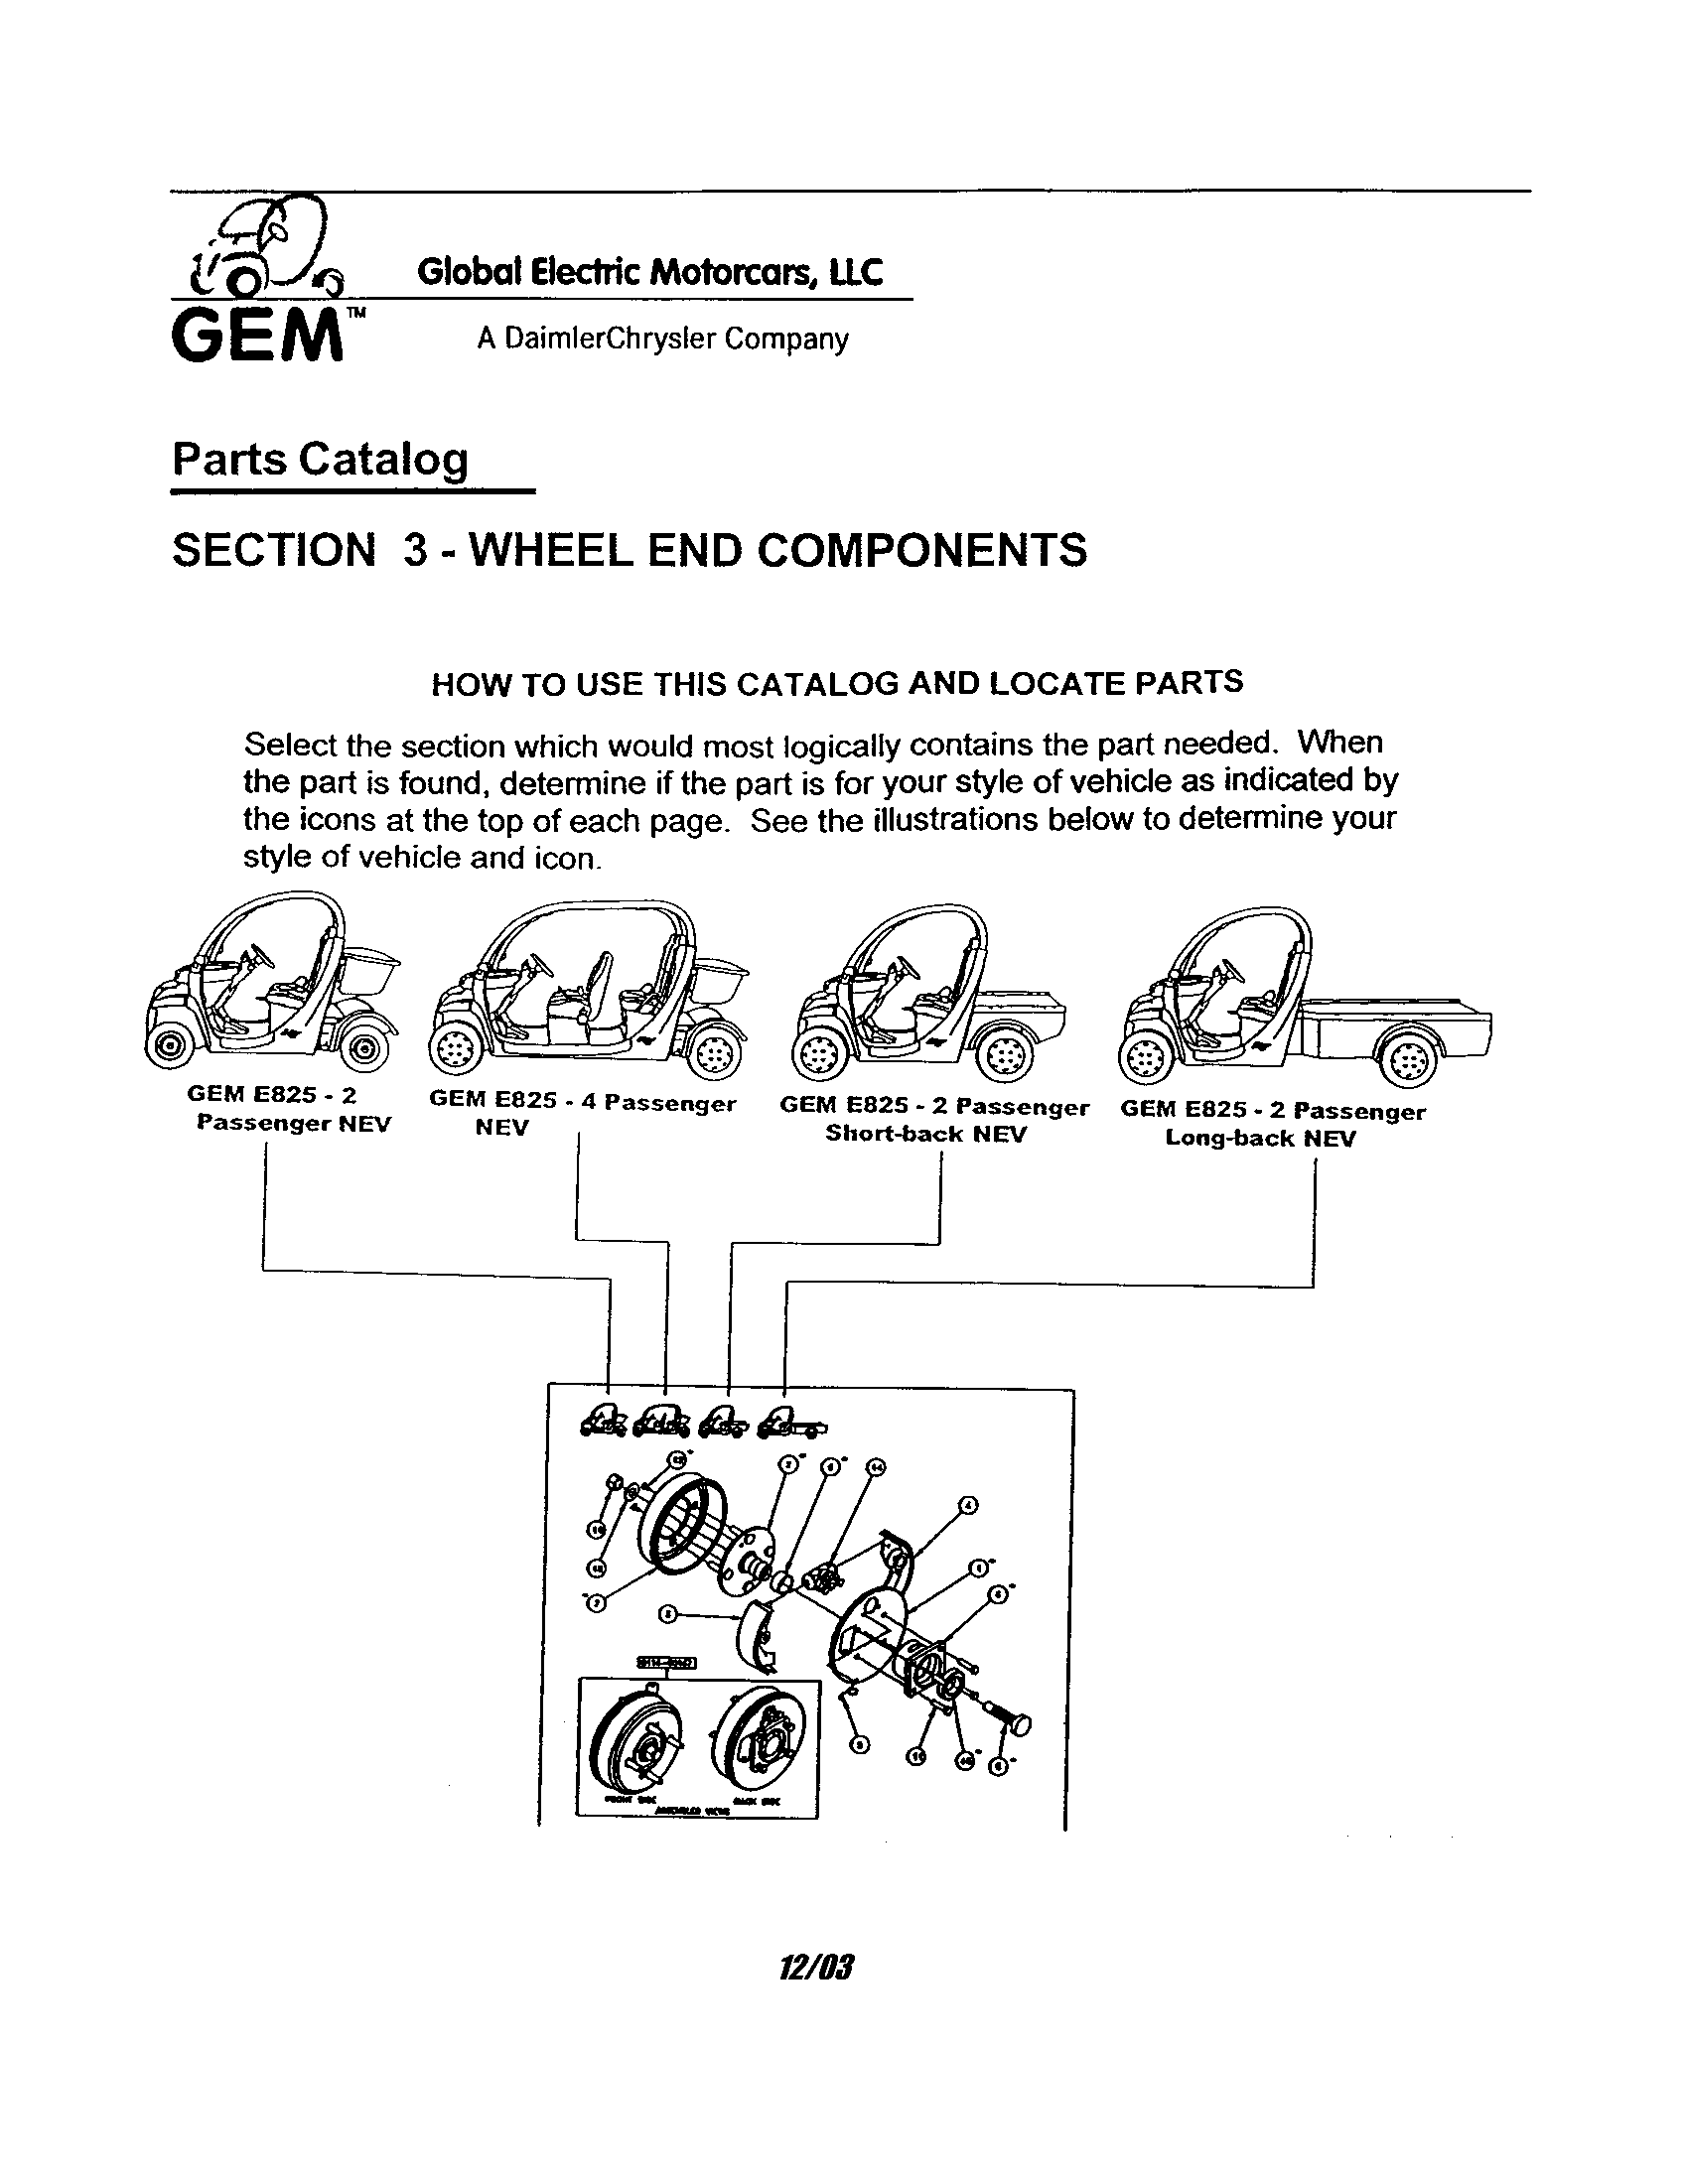 301 Moved Permanently gem car e825 electrical diagrams 